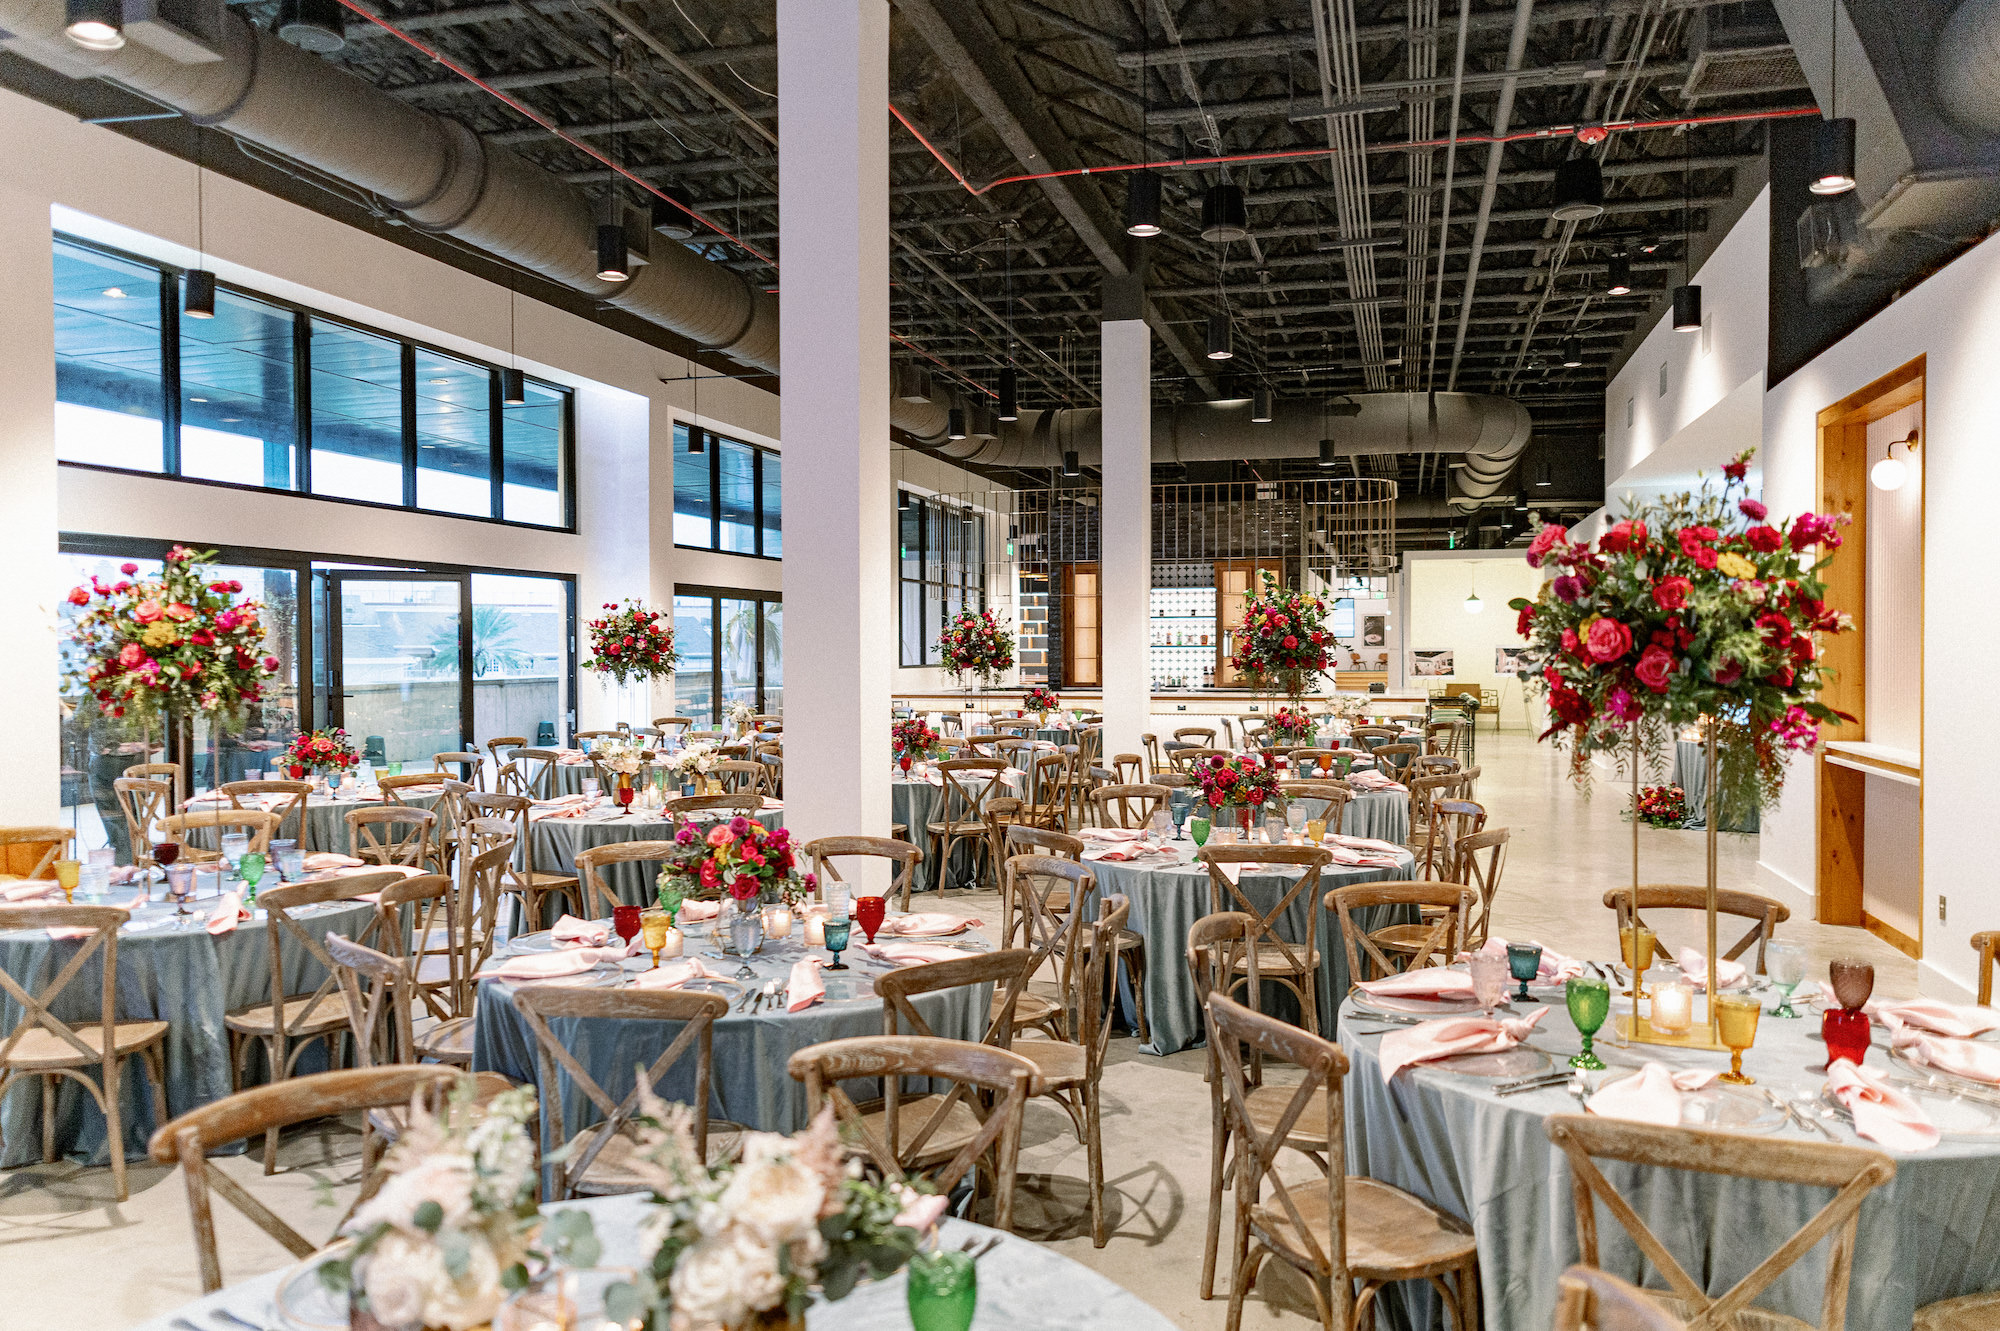 Vibrant Same Sex Lesbian Wedding Wedding Reception Decor, Round Tables with Dusty Blue Linens, Wooden Cross Back Chairs, Tall Red, Yellow and Pink Floral and Greenery Centerpieces | Tampa Bay Wedding Photographer Dewitt for Love Photography | Wedding Rentals Gabro Event Services | Industrial Modern Wedding Venue Hyde House